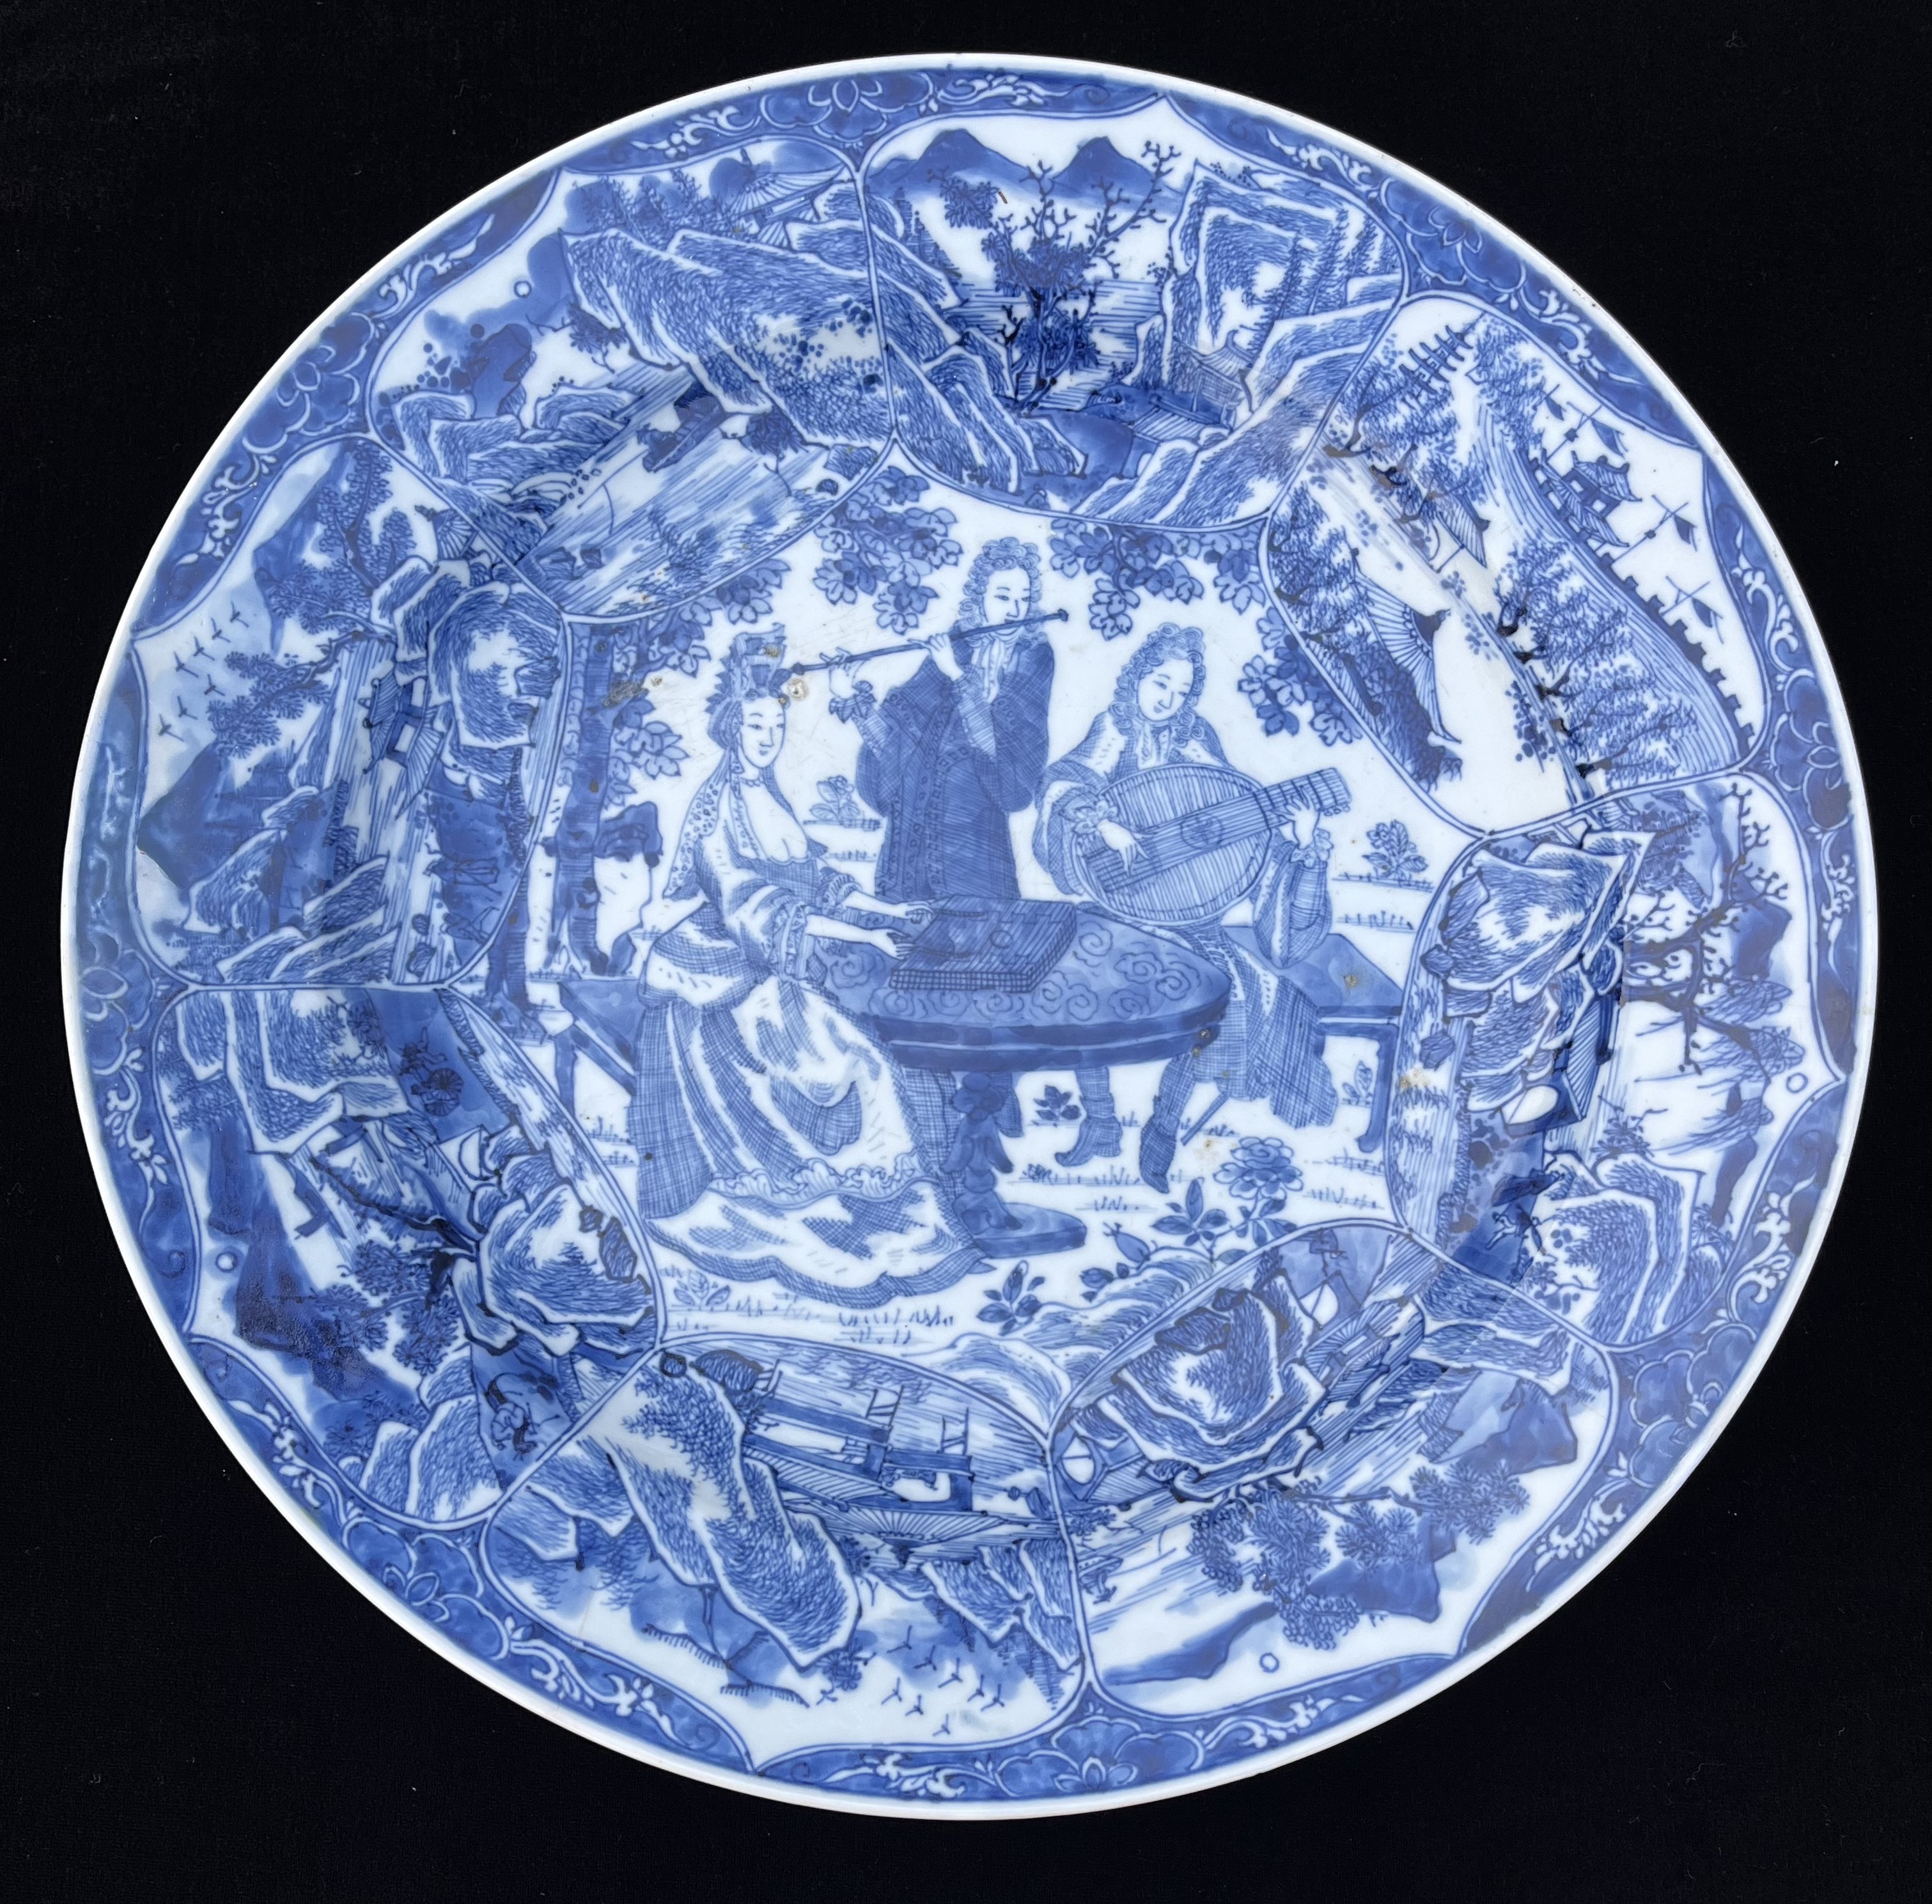 A CHINESE BLUE AND WHITE PORCELAIN ‘MUSICIANS' DISH, QING DYNASTY, KANGXI PERIOD, 1662 – 1722 - Image 3 of 11